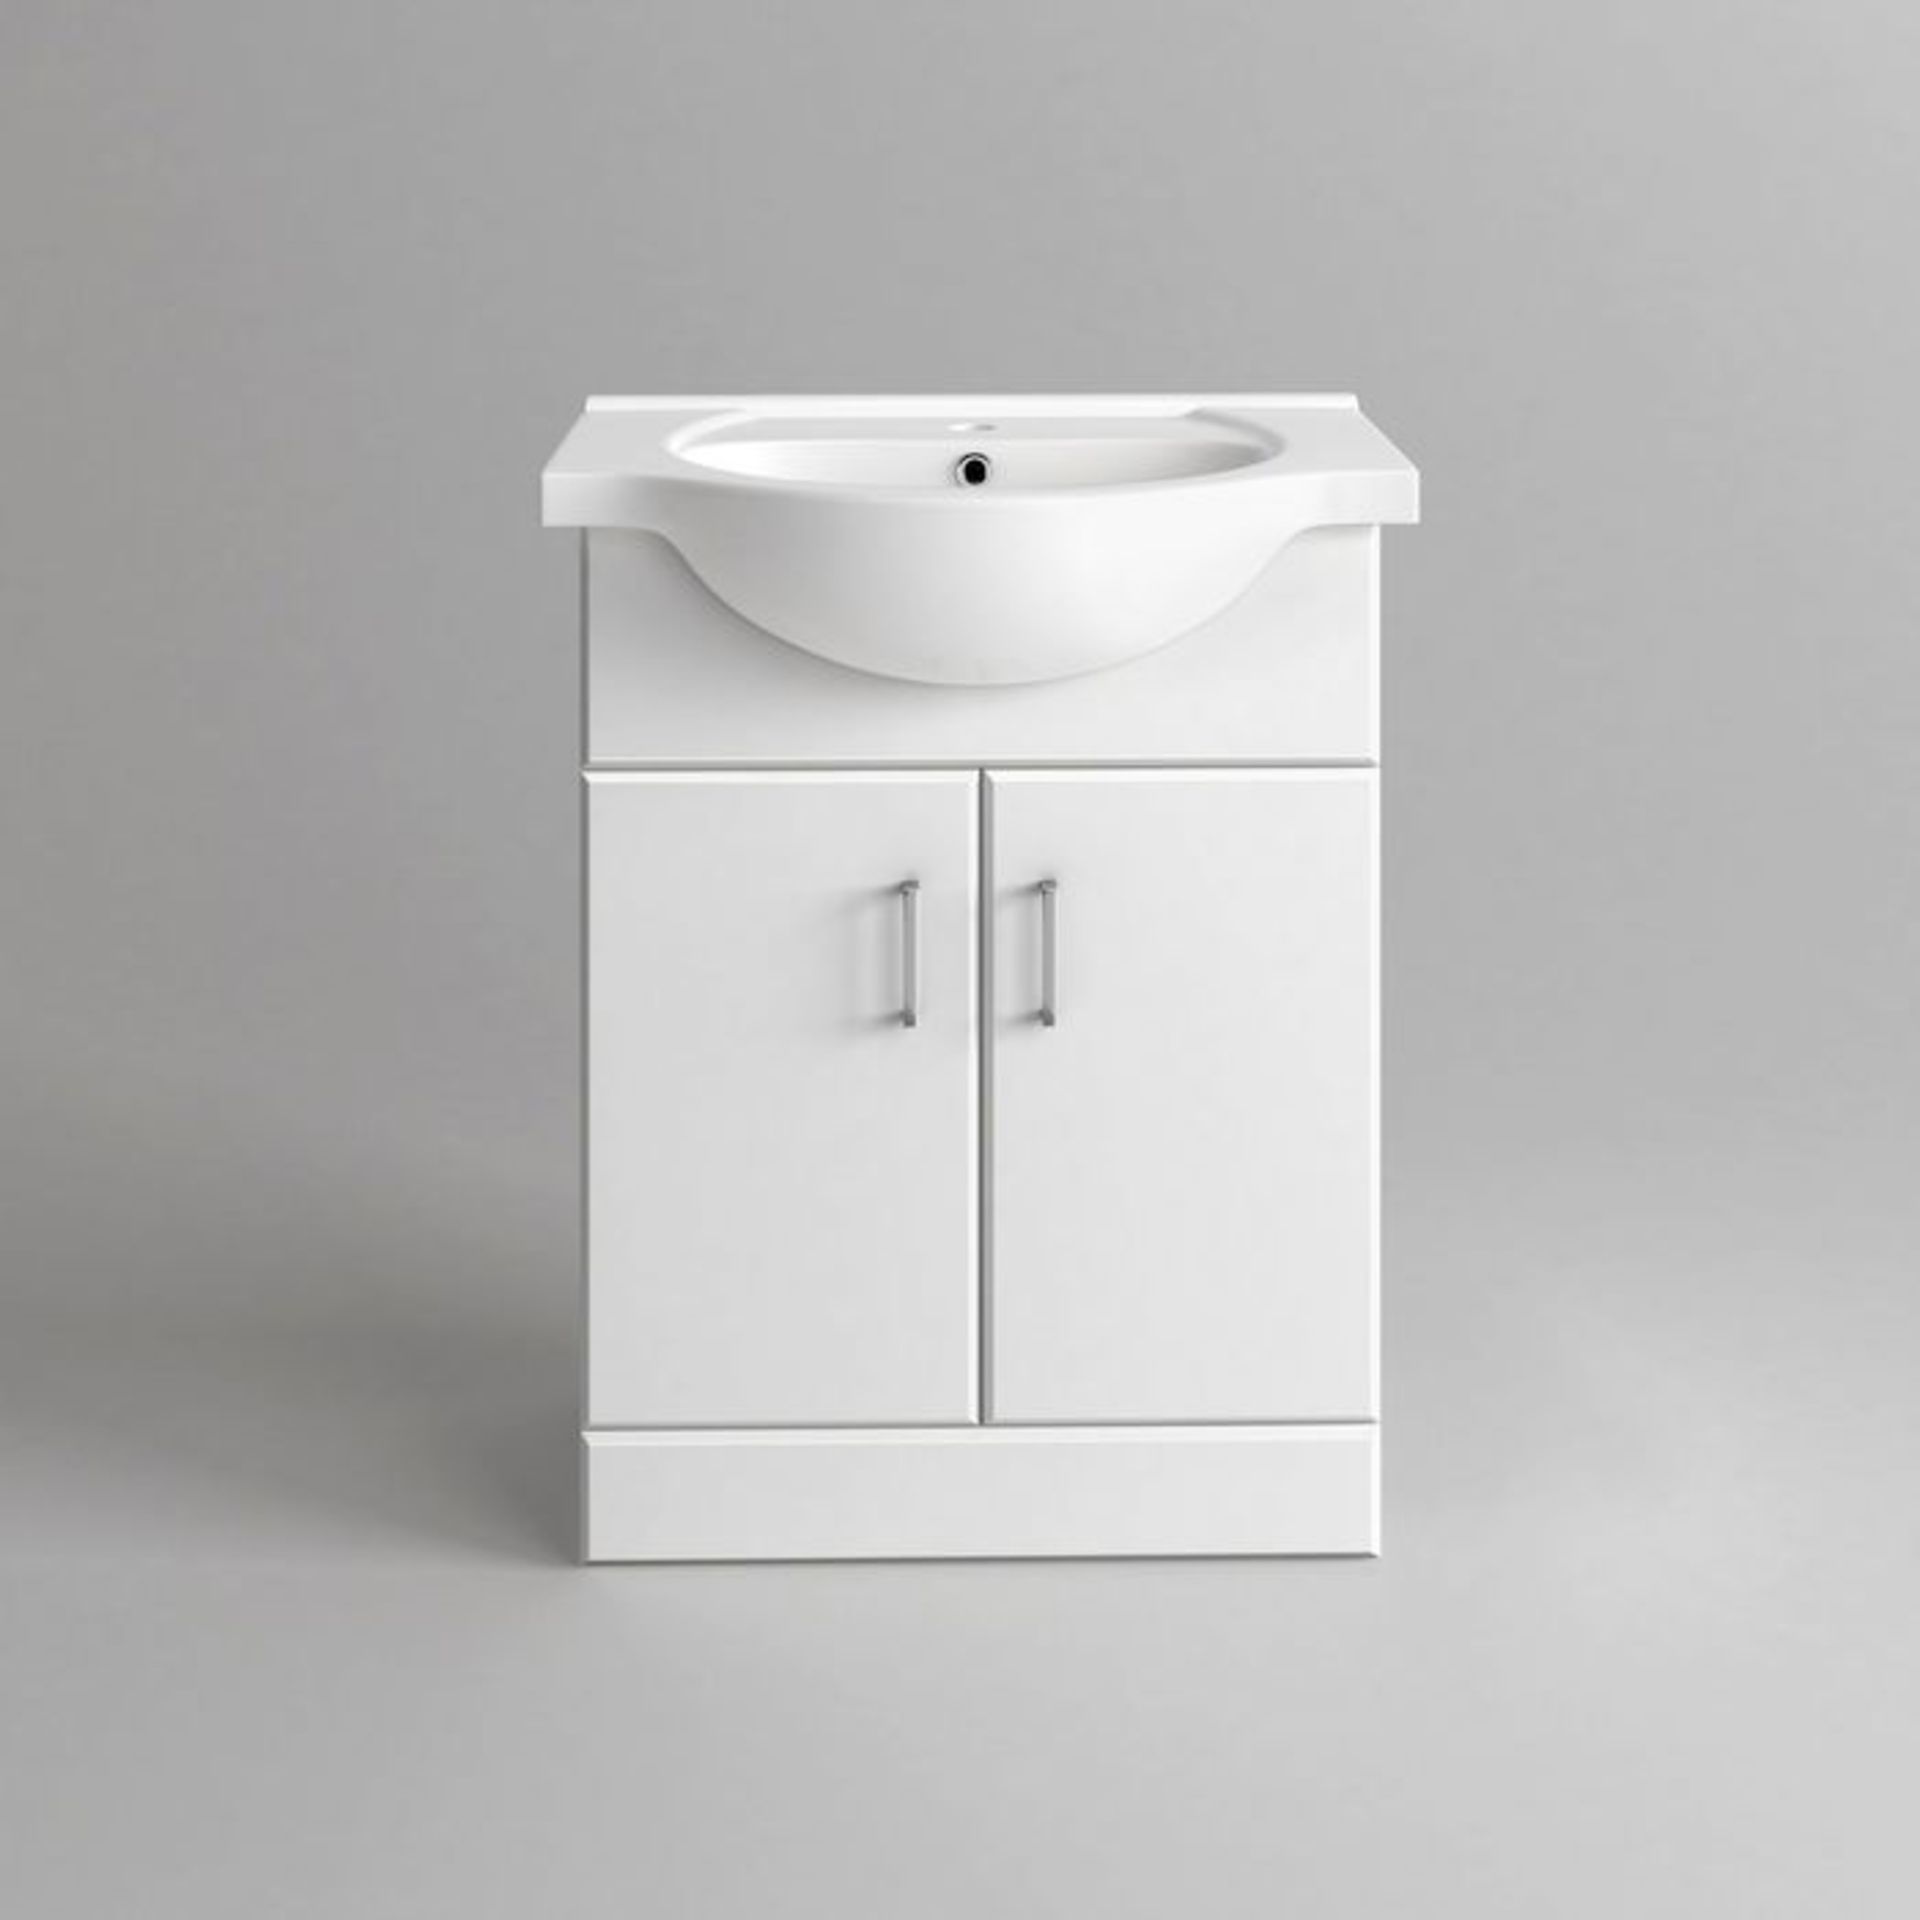 (MQ29) 550x300mm Quartz Gloss White Built In Sink Cabinet. RRP £349.99. Comes complete with ba... - Image 4 of 4